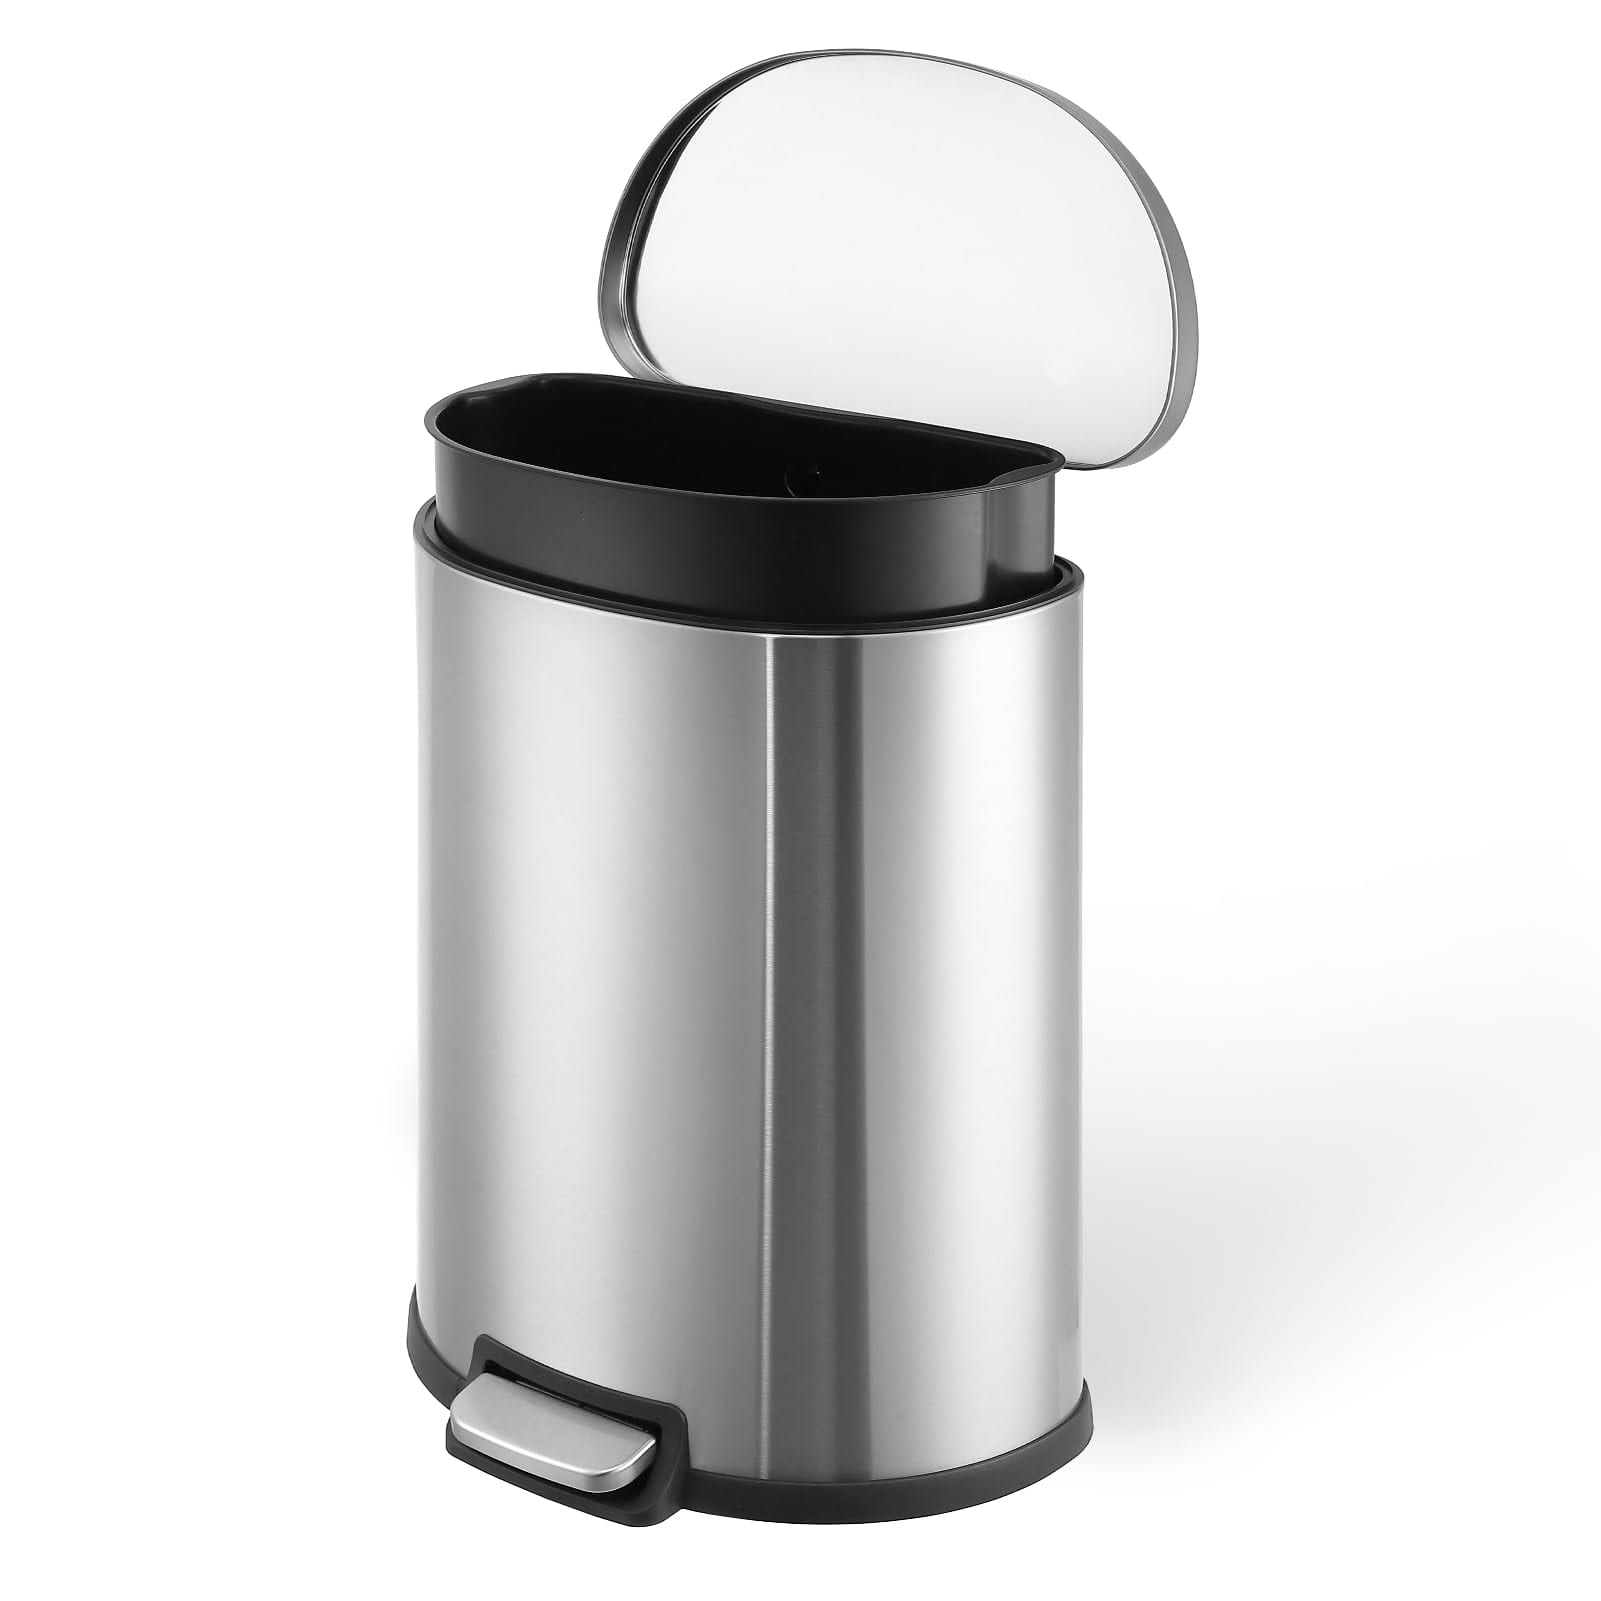 GARVEE 50L Trash Can Semi-Circular Steel Pedal Recycle Bin with Lid and Inner Buckets Hands-Free